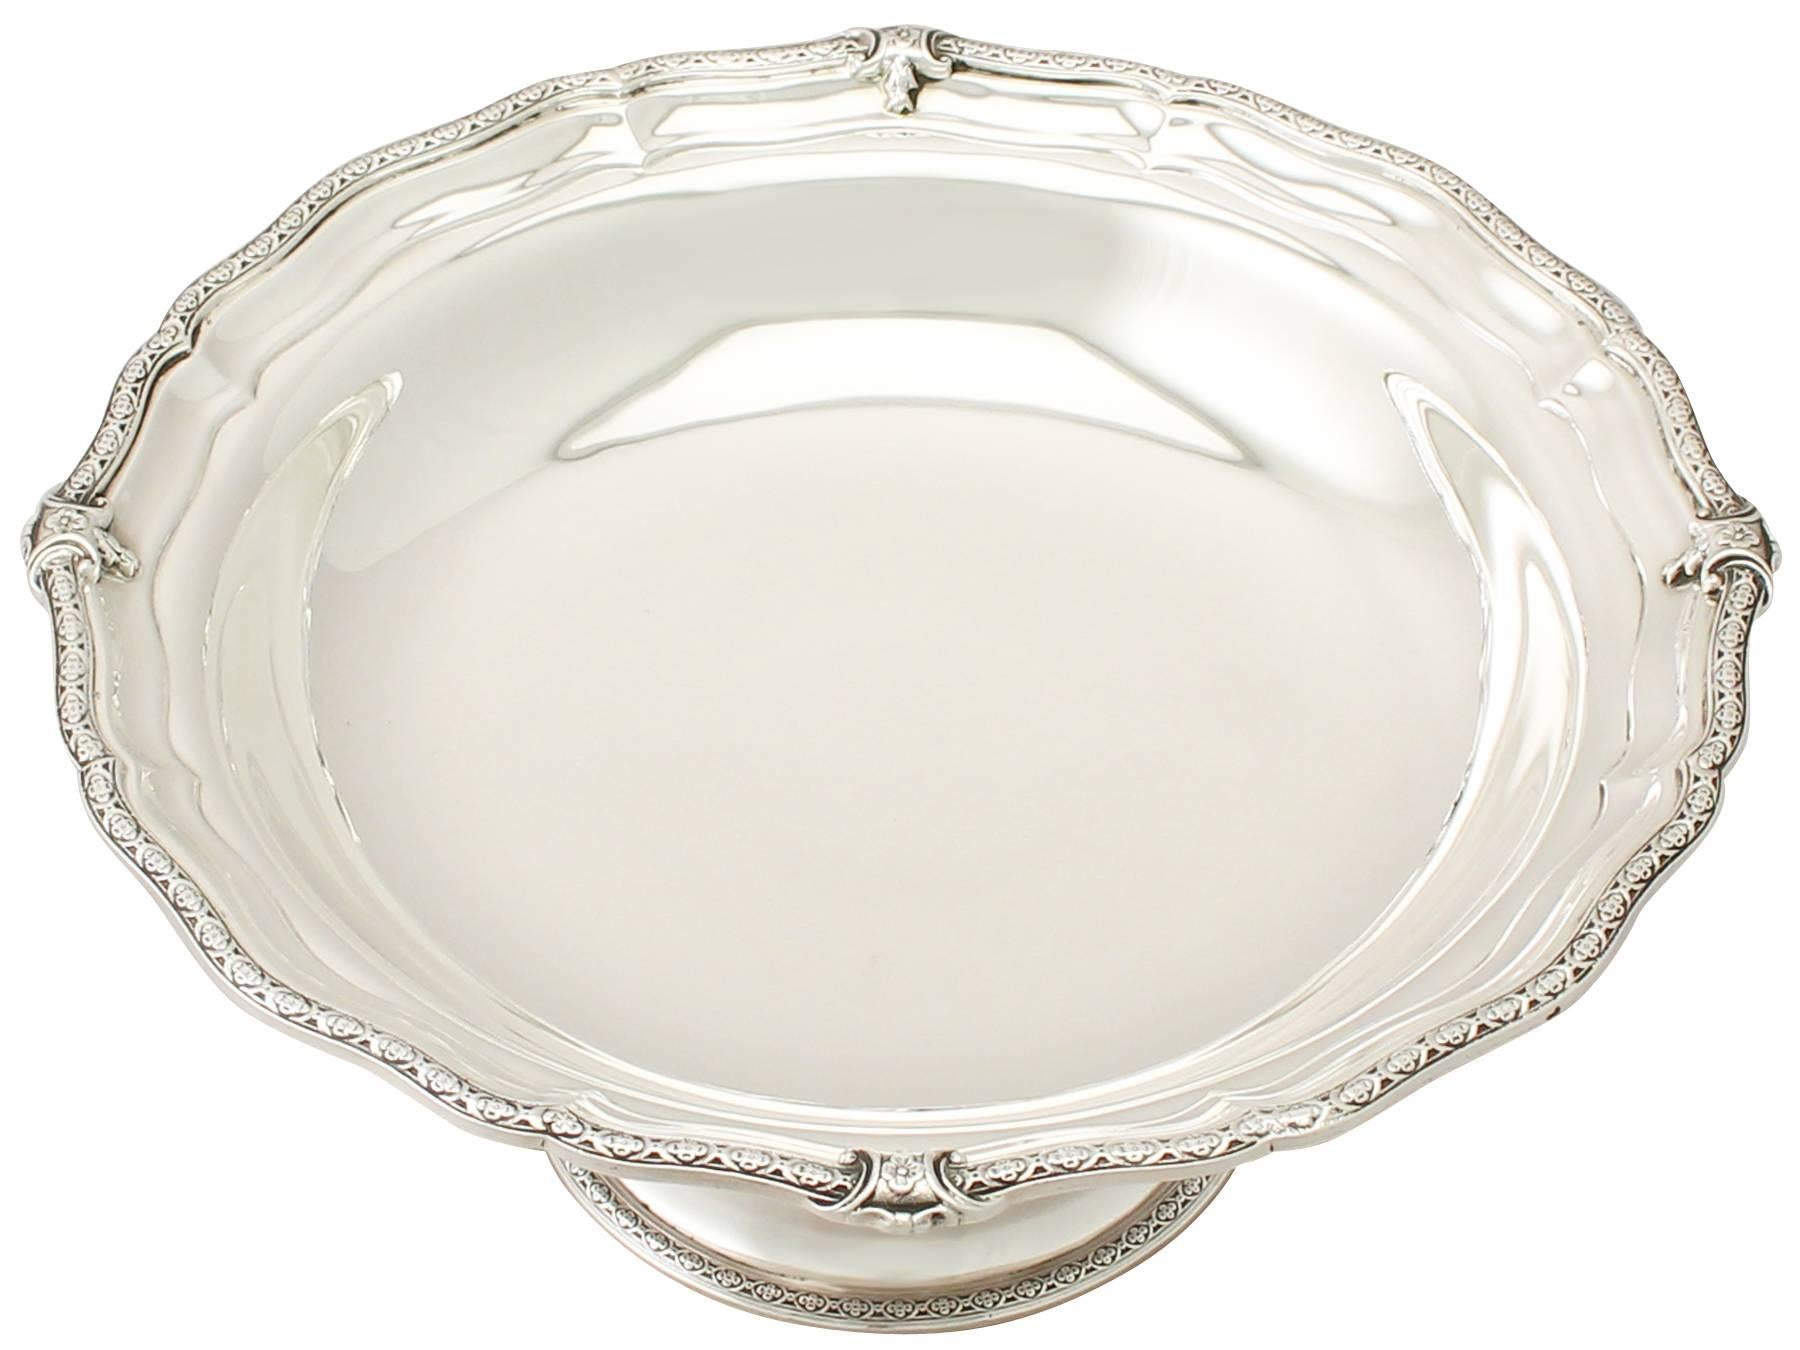 Other Antique George V English Sterling Silver Fruit Dish